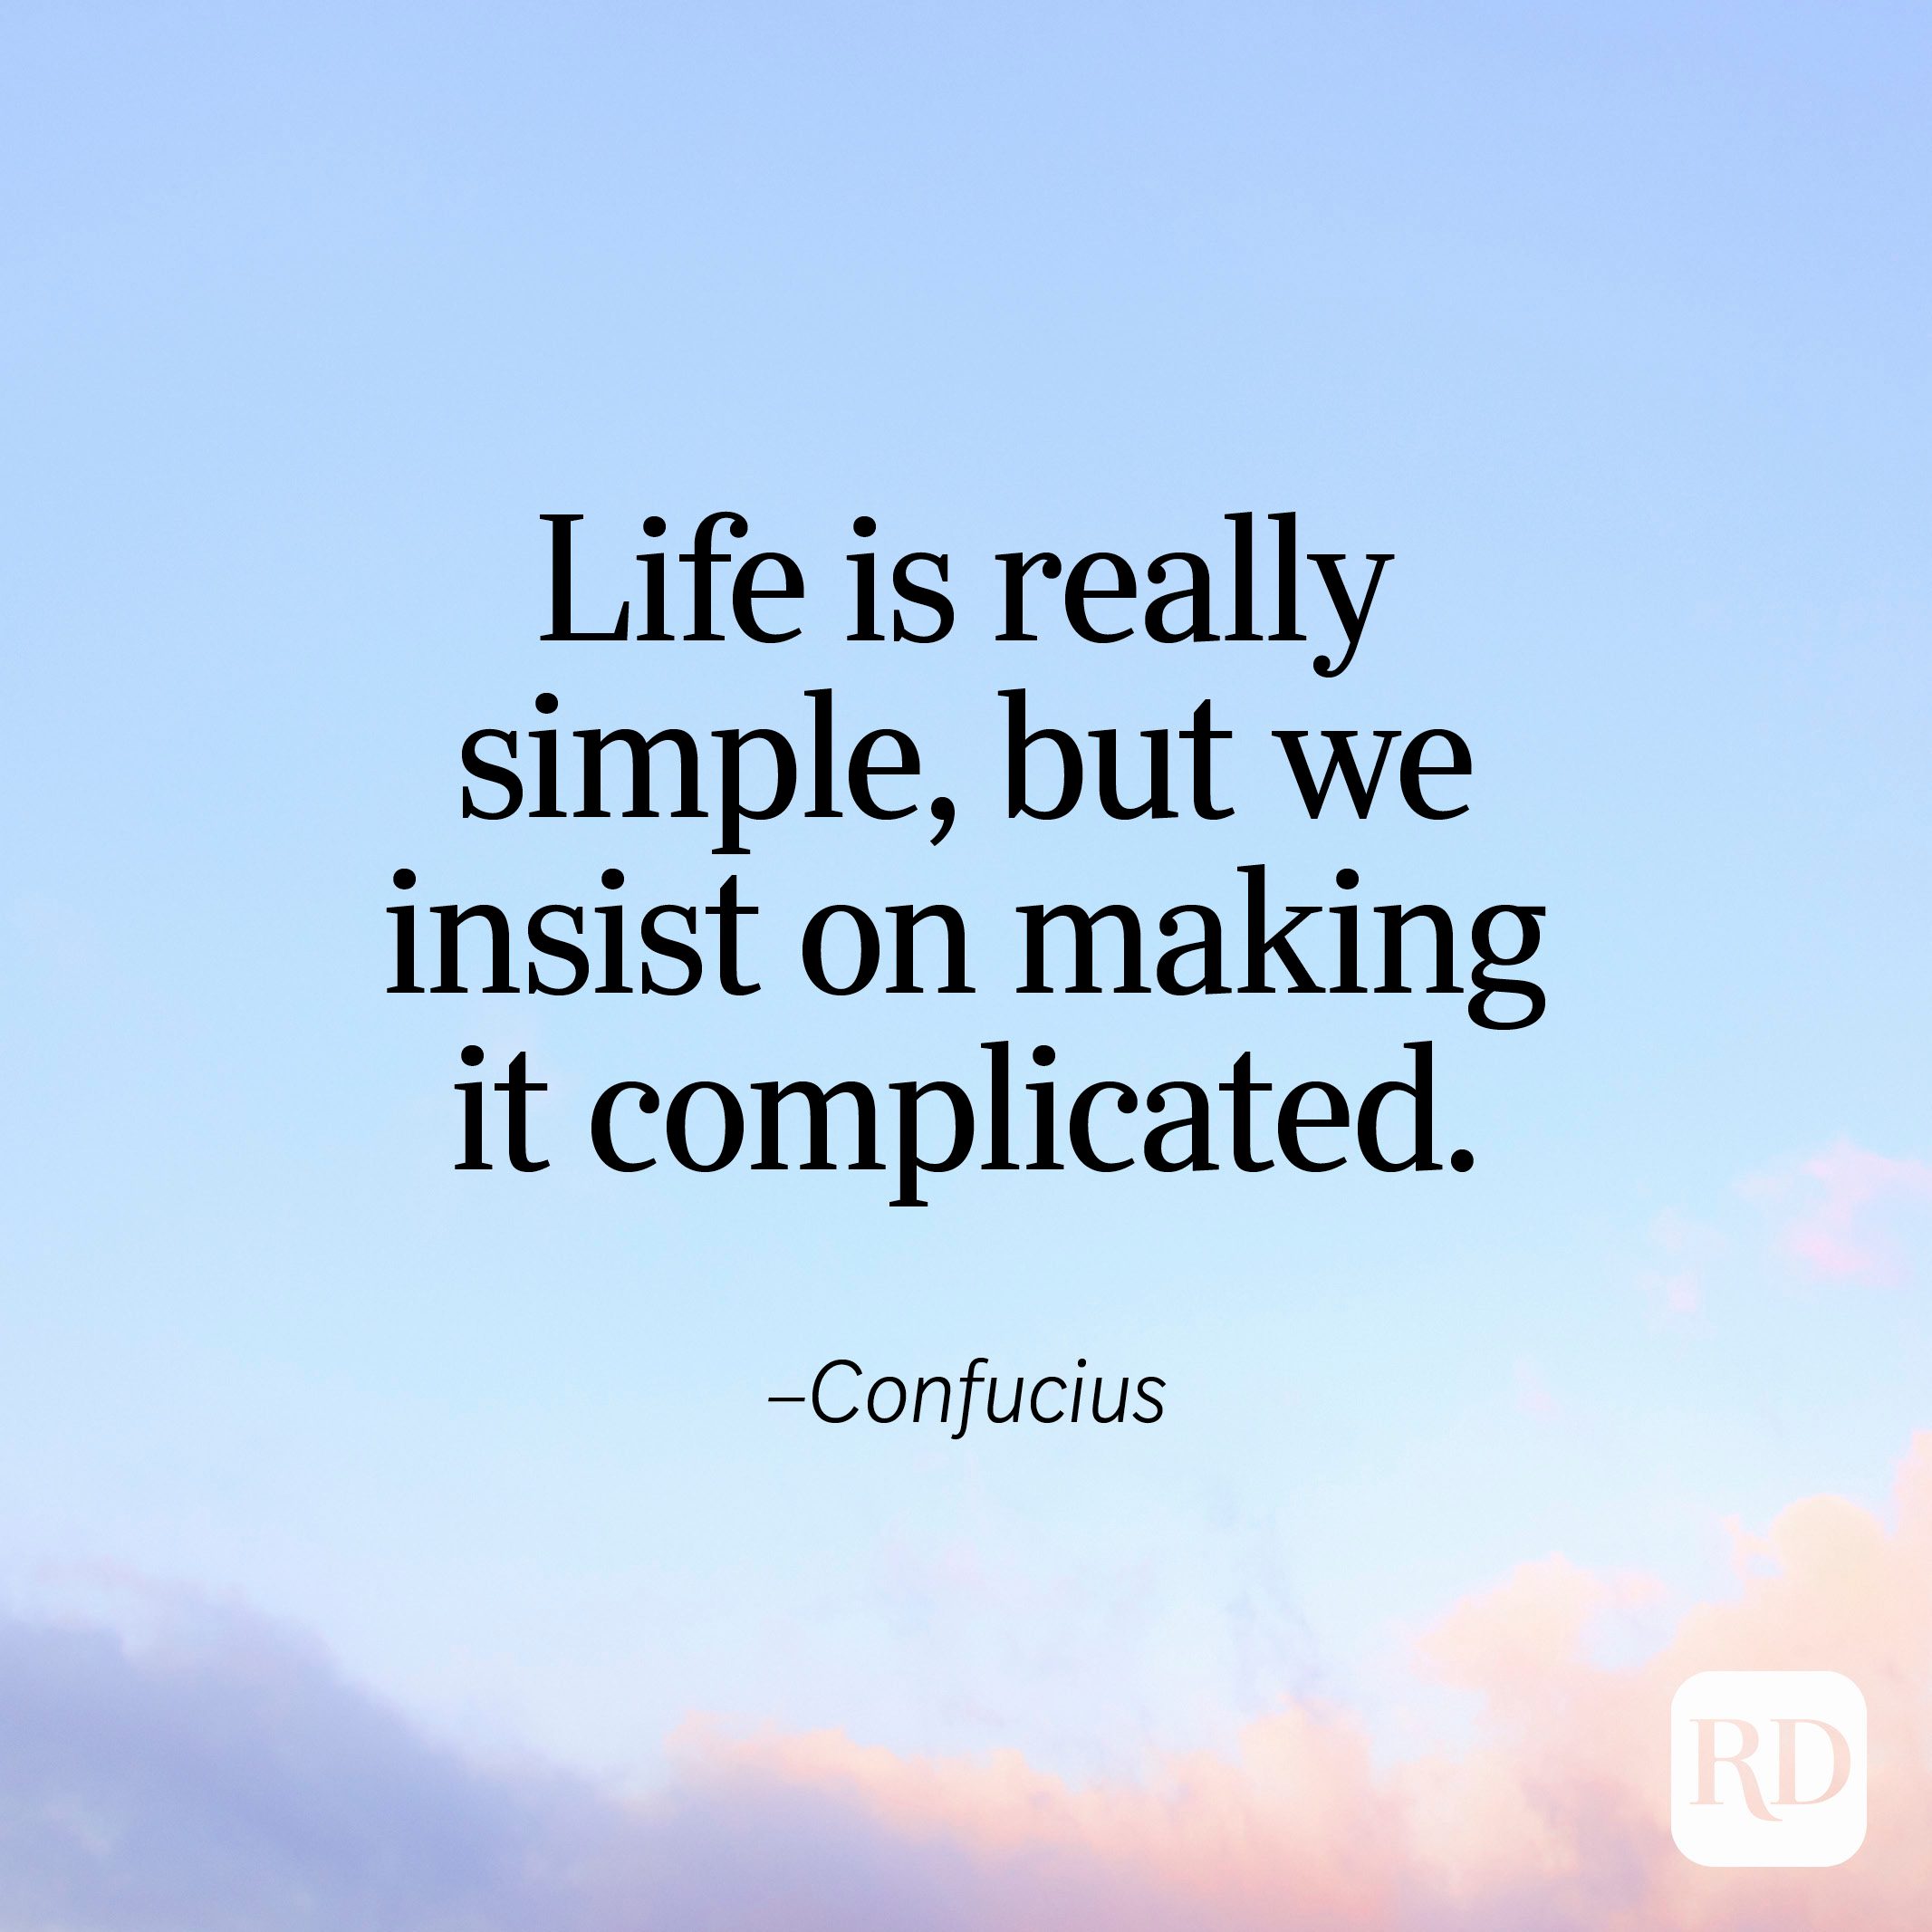 "Life is really simple, but we insist on making it complicated." —Confucius